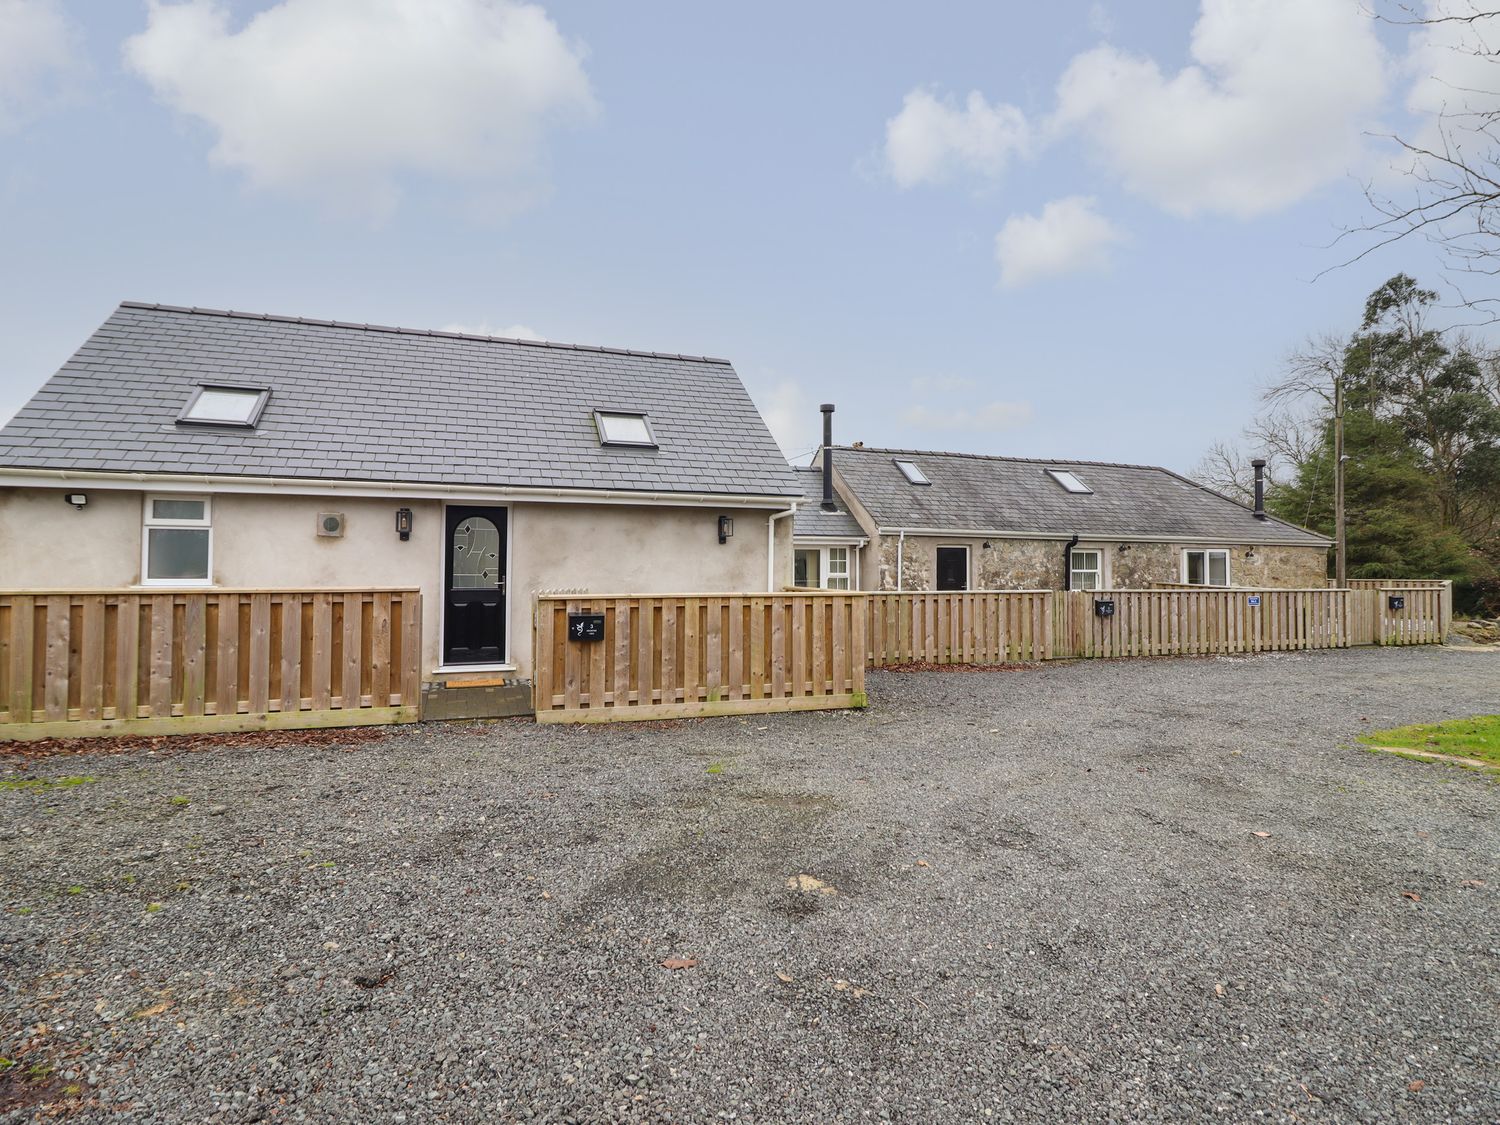 3 Mountain View - Anglesey - 1035156 - photo 1